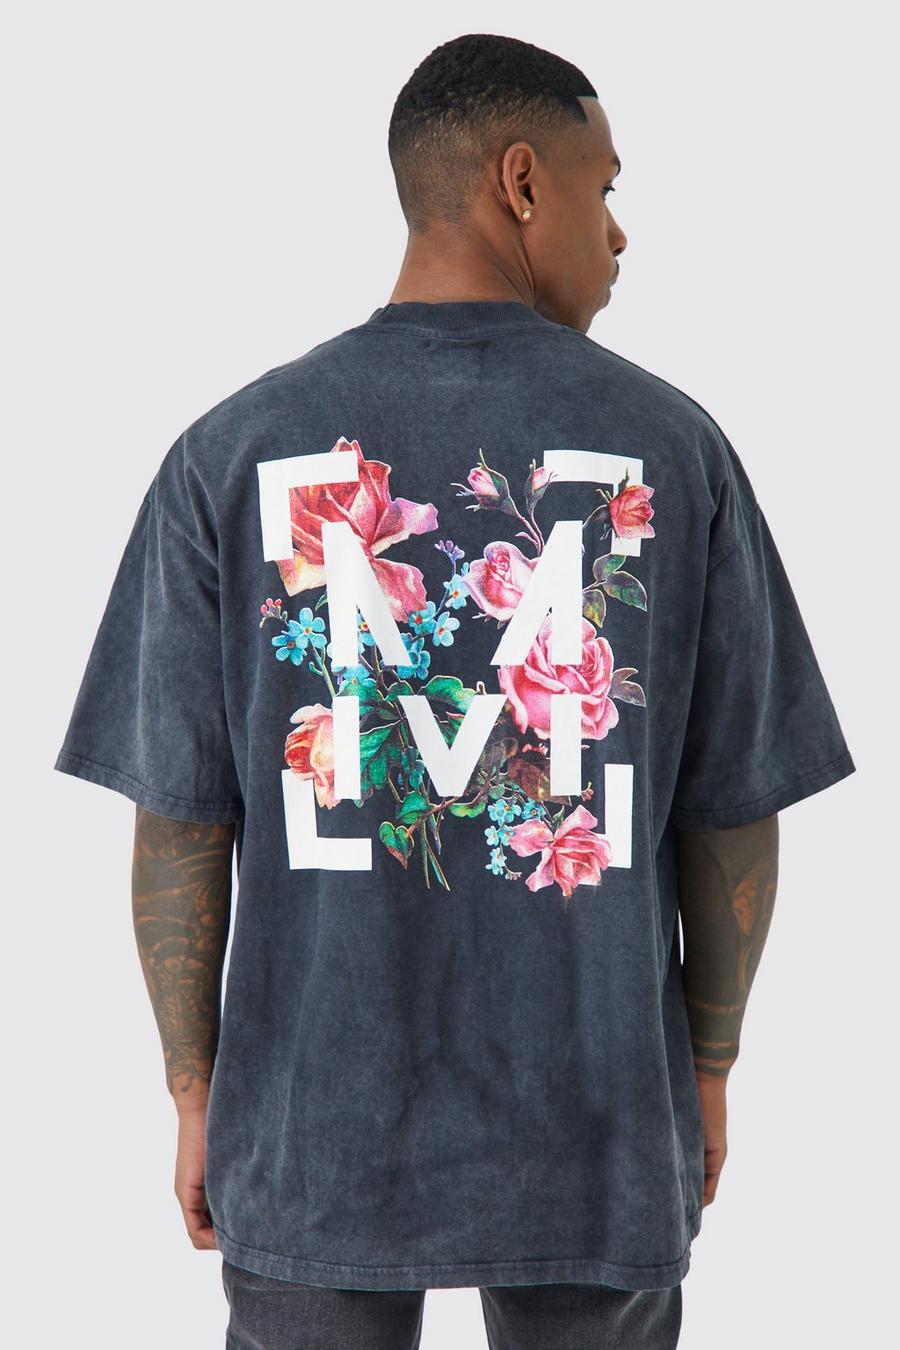 Charcoal Oversized Floral Graphic Acid Wash T-shirt